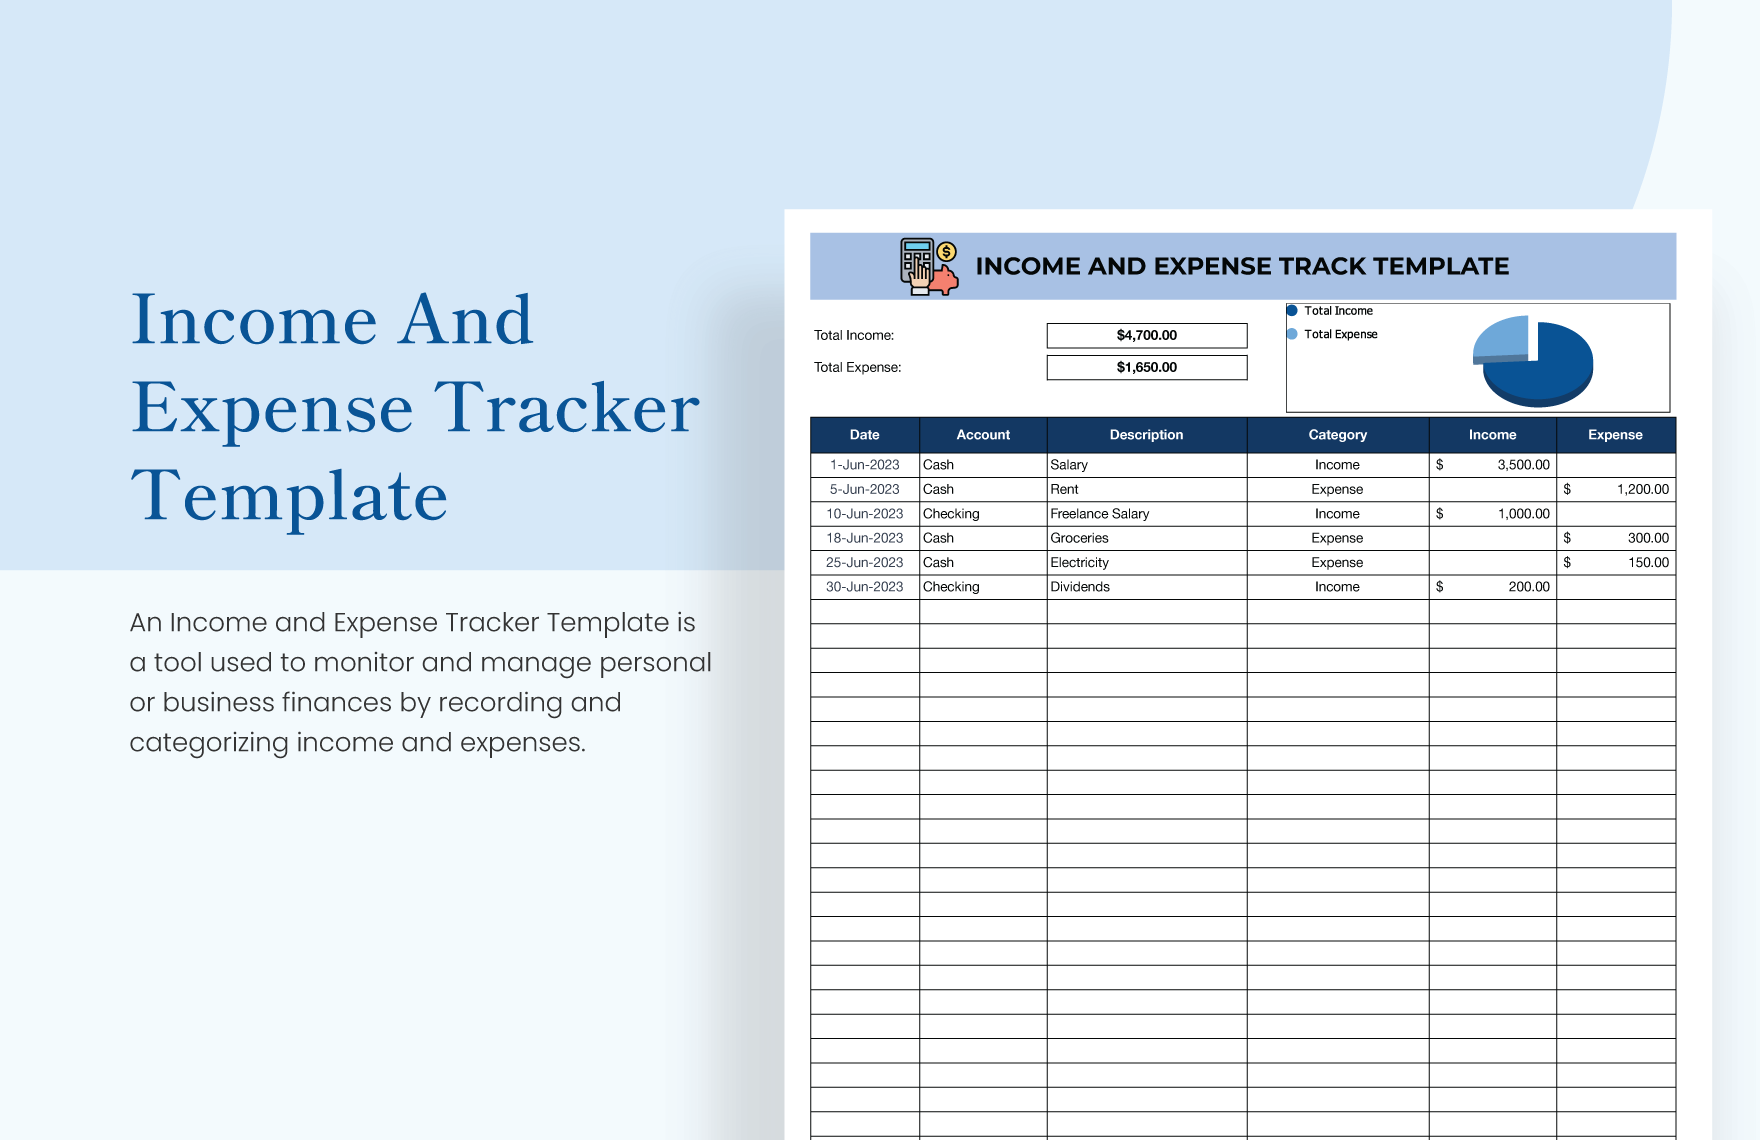 income-and-expense-tracker